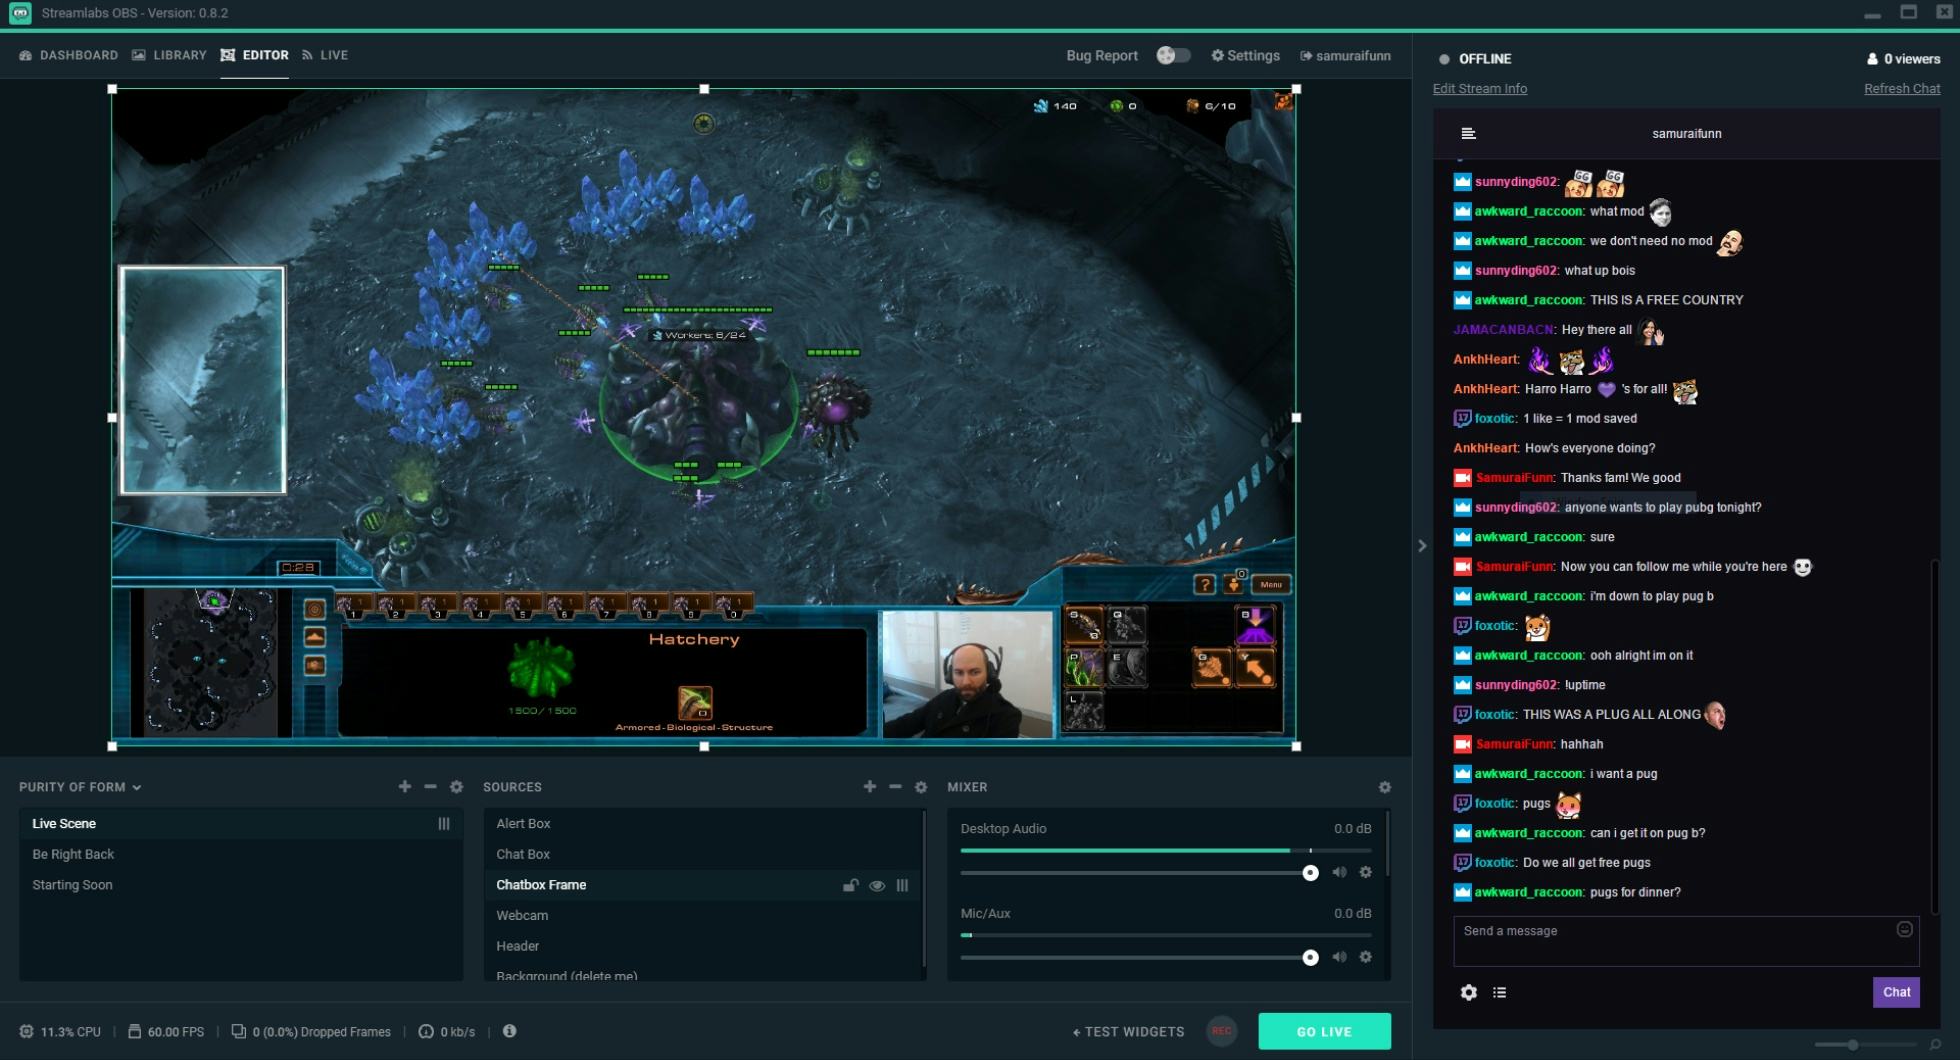 Streamlabs chat box